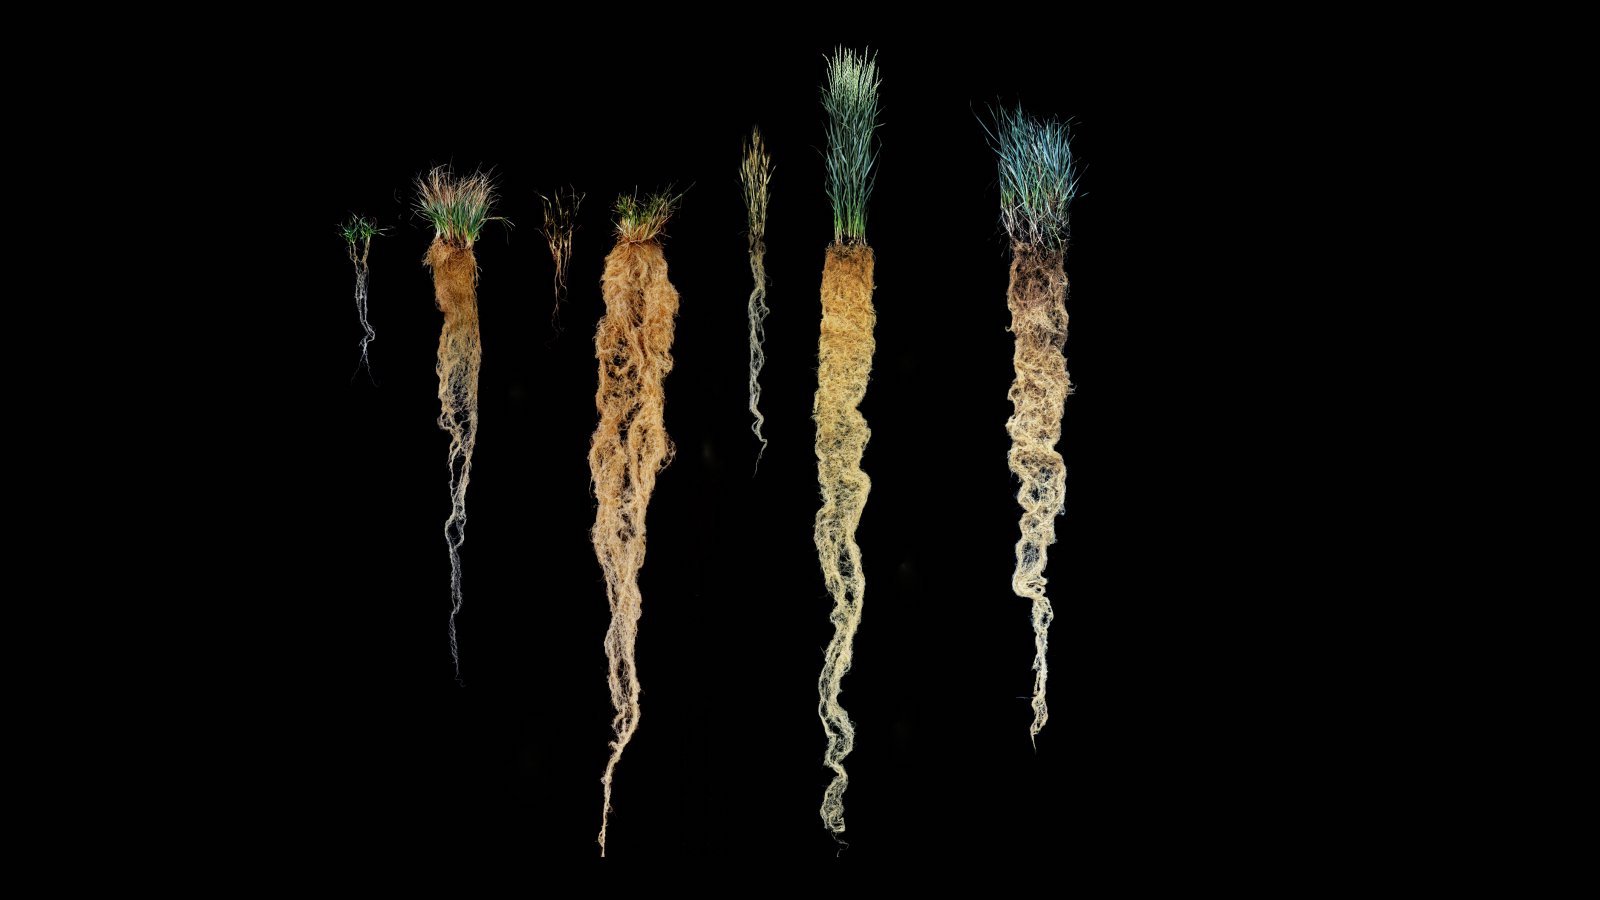 Wheatgrass is a perennial relative of wheat and was used by Land Institute researchers to develop Kernza. Being a perennial, its root system is considerably longer than regular wheat (pictured at the top left of each root system sample).